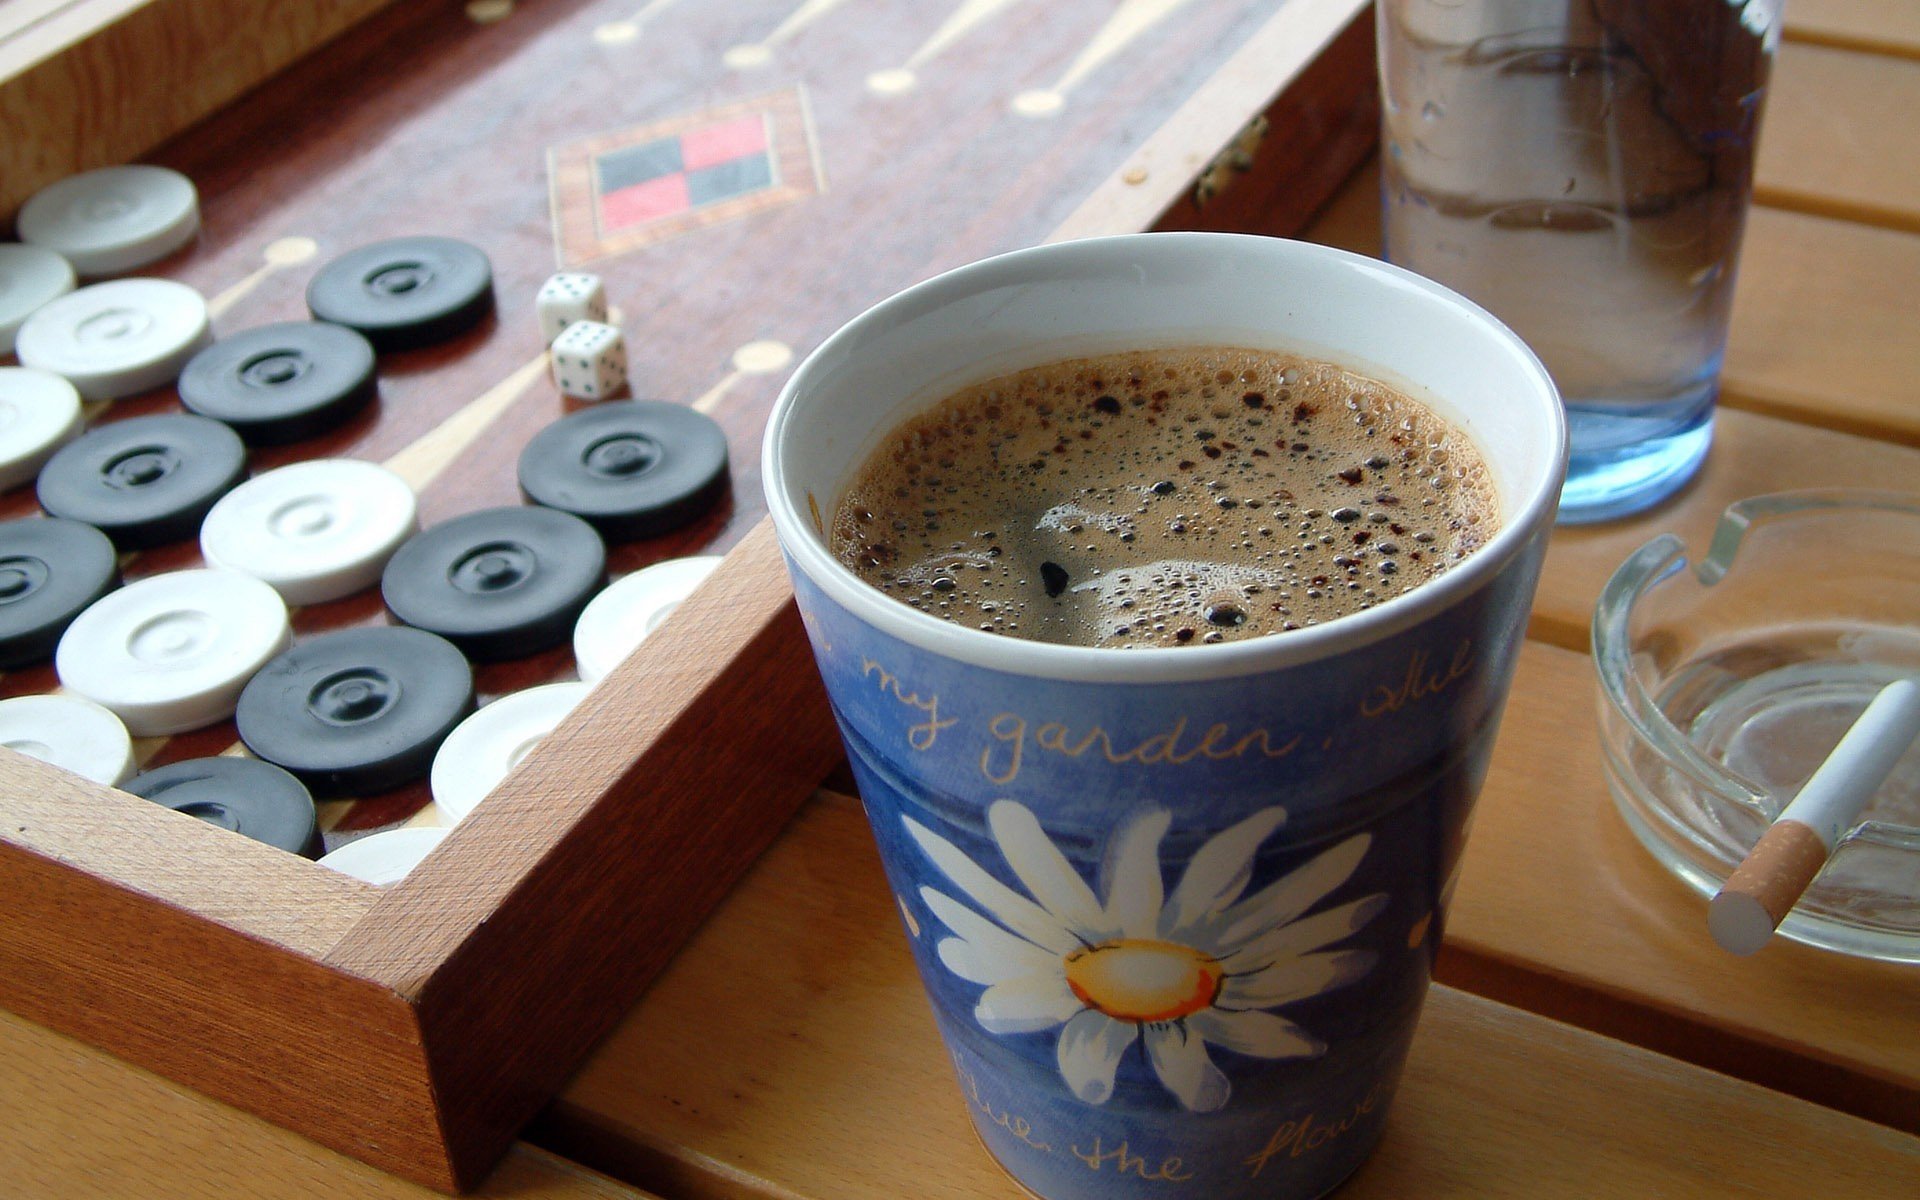 board games, Dice, Coffee, Cup, Wooden surface, Cigarettes Wallpaper